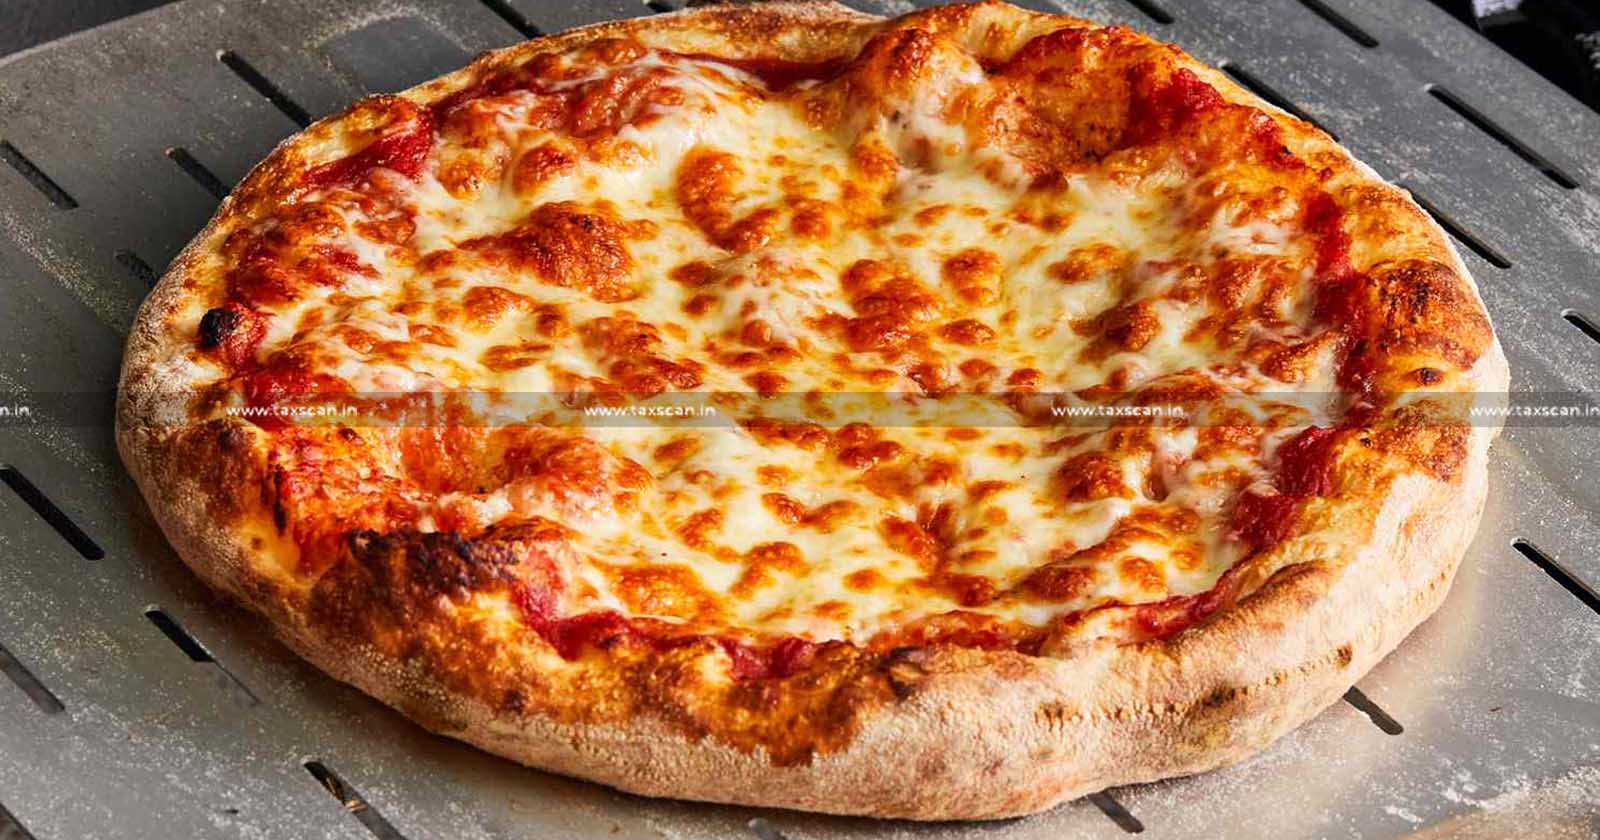 Pizza - sandwich - cooked foods - pizza sandwich tax - baked branded products - Rajasthan HC - VAT judgment - VAT on Pizza and sandwich - cooked food exemption benefit - Taxscan